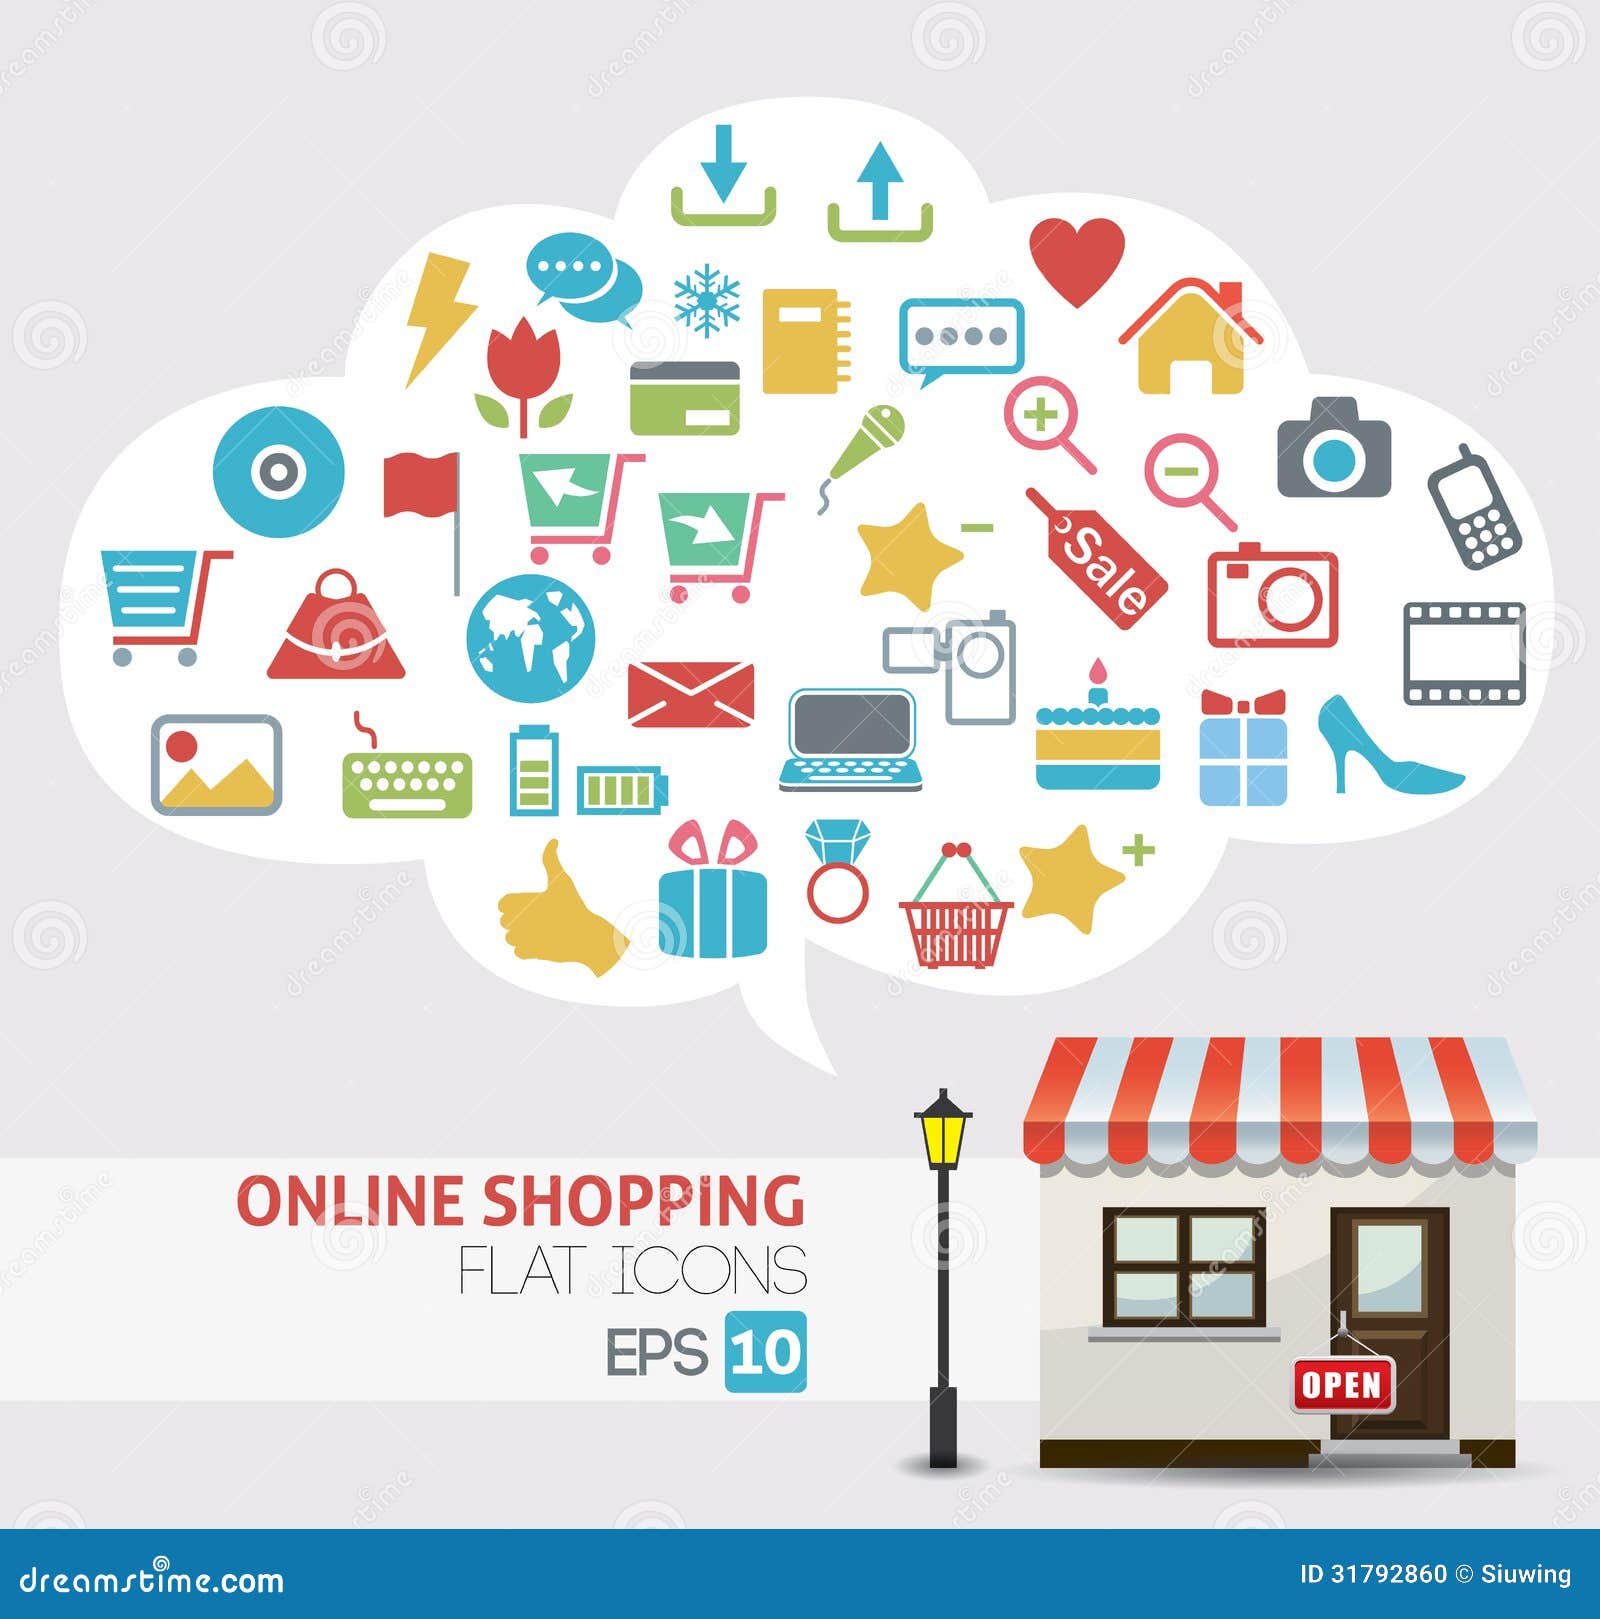 online-shopping-vector-online-store-icons-icon-set-31792860.jpg